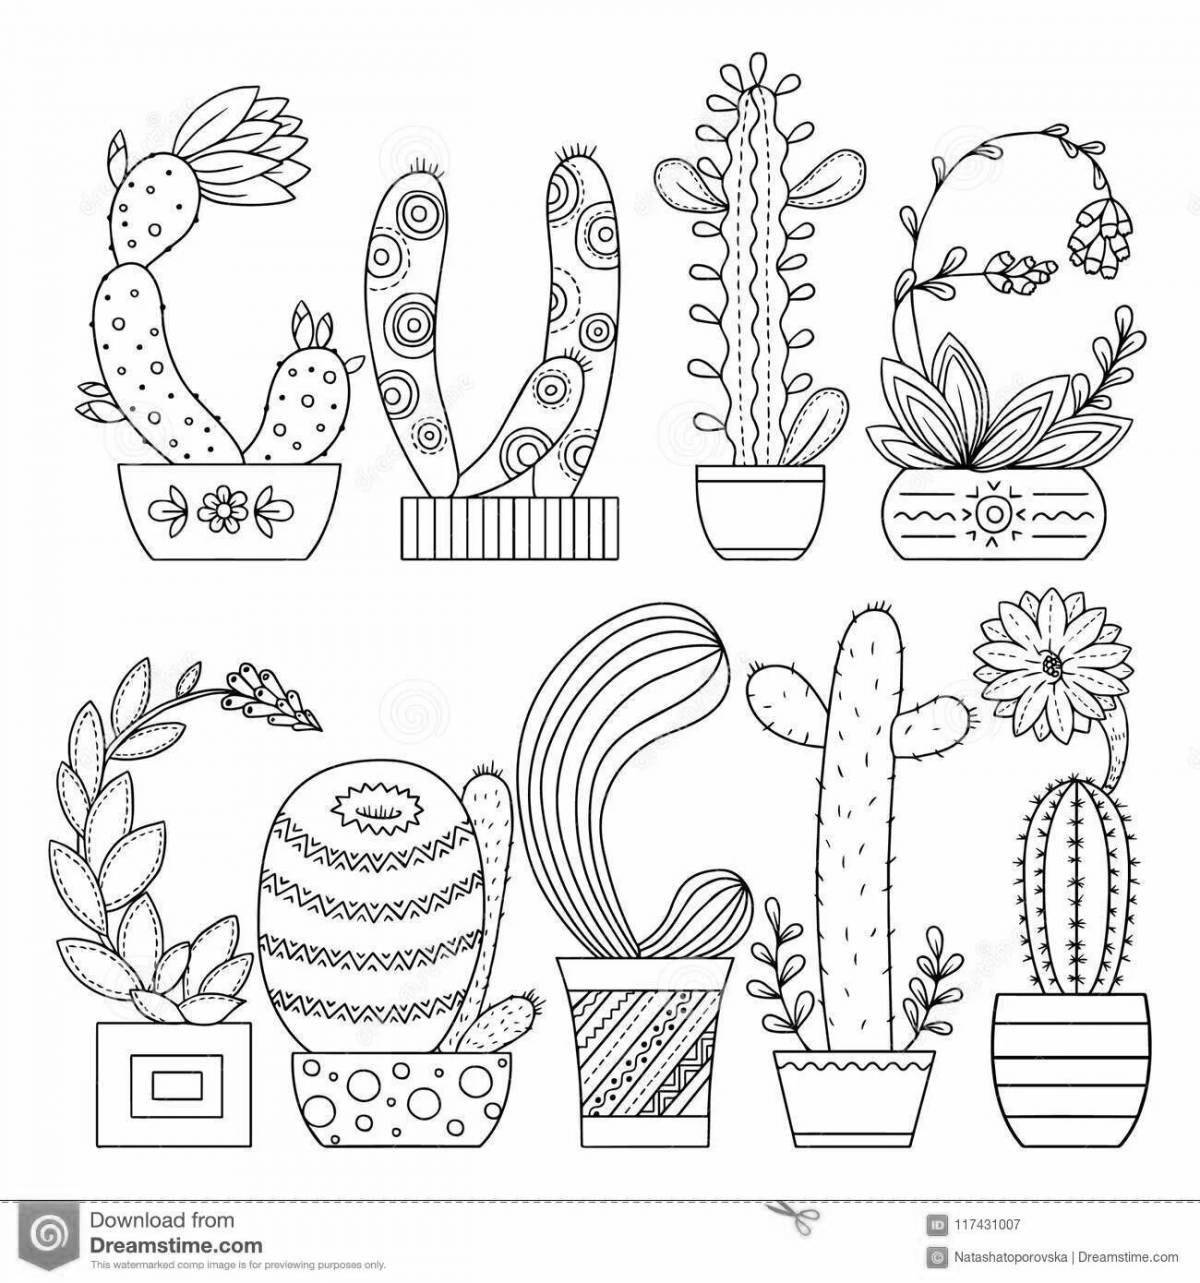 Adorable cactus coloring page